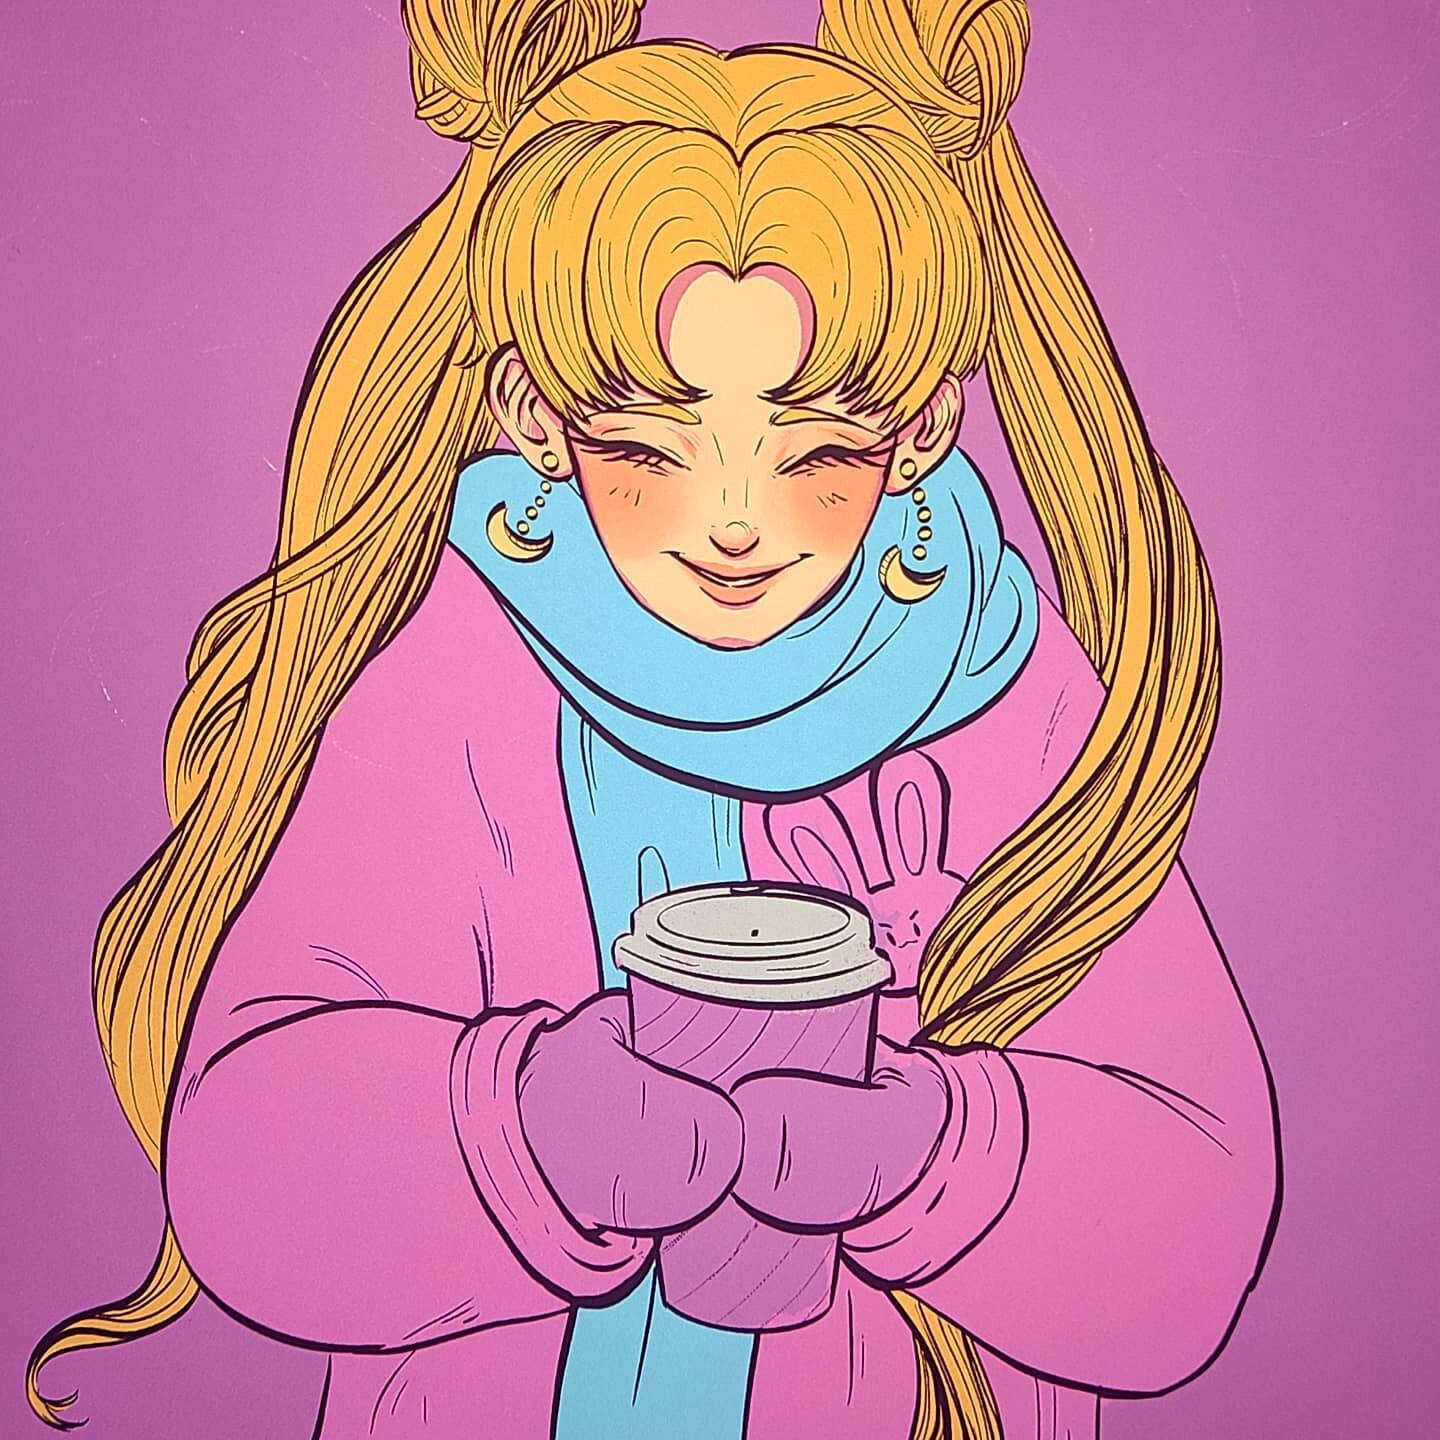 No lie this is one of the very first drawings on my iPad 2+ years ago but I never shared it anywhere as I didn't know how I felt about it at the time! Warm sweaters and happy thoughts to all of you this holiday week! ☆&curren;~
#usagi #holidays #warm